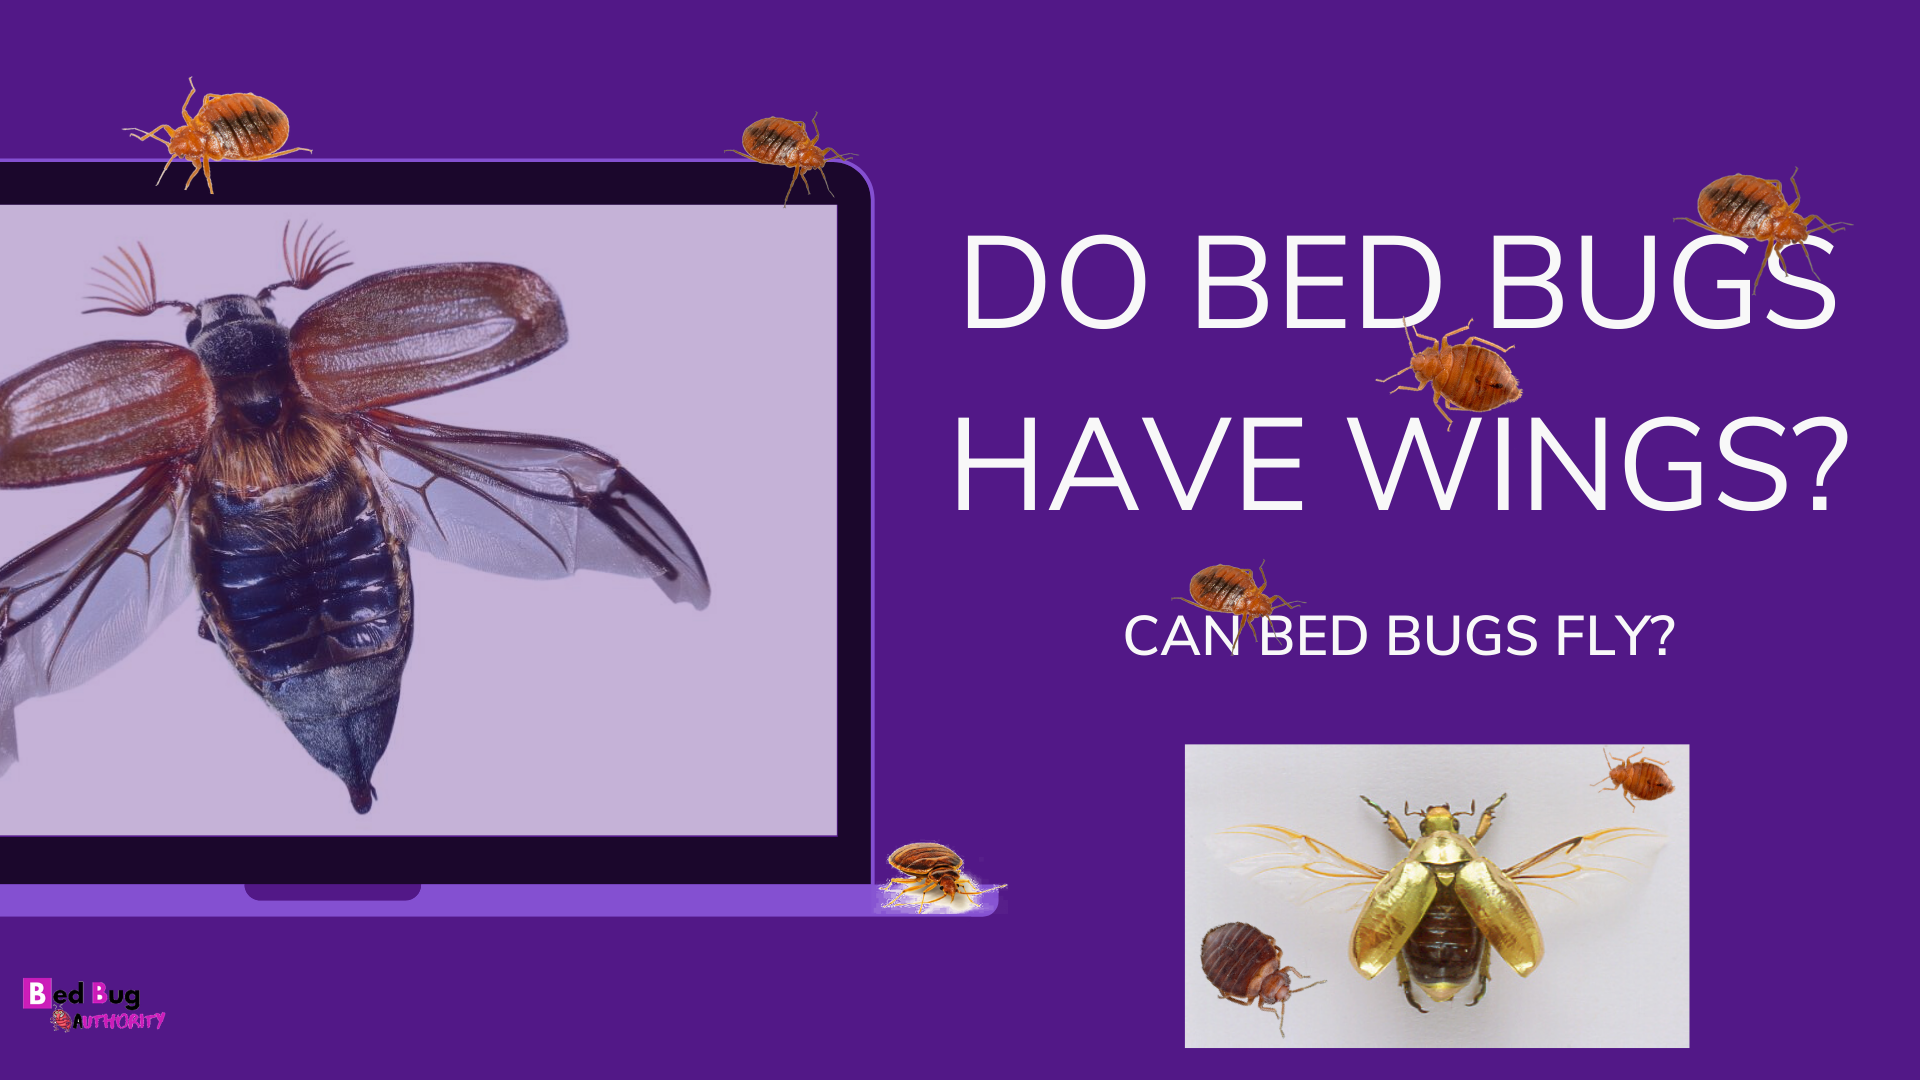 CAN BED BUGS FLY